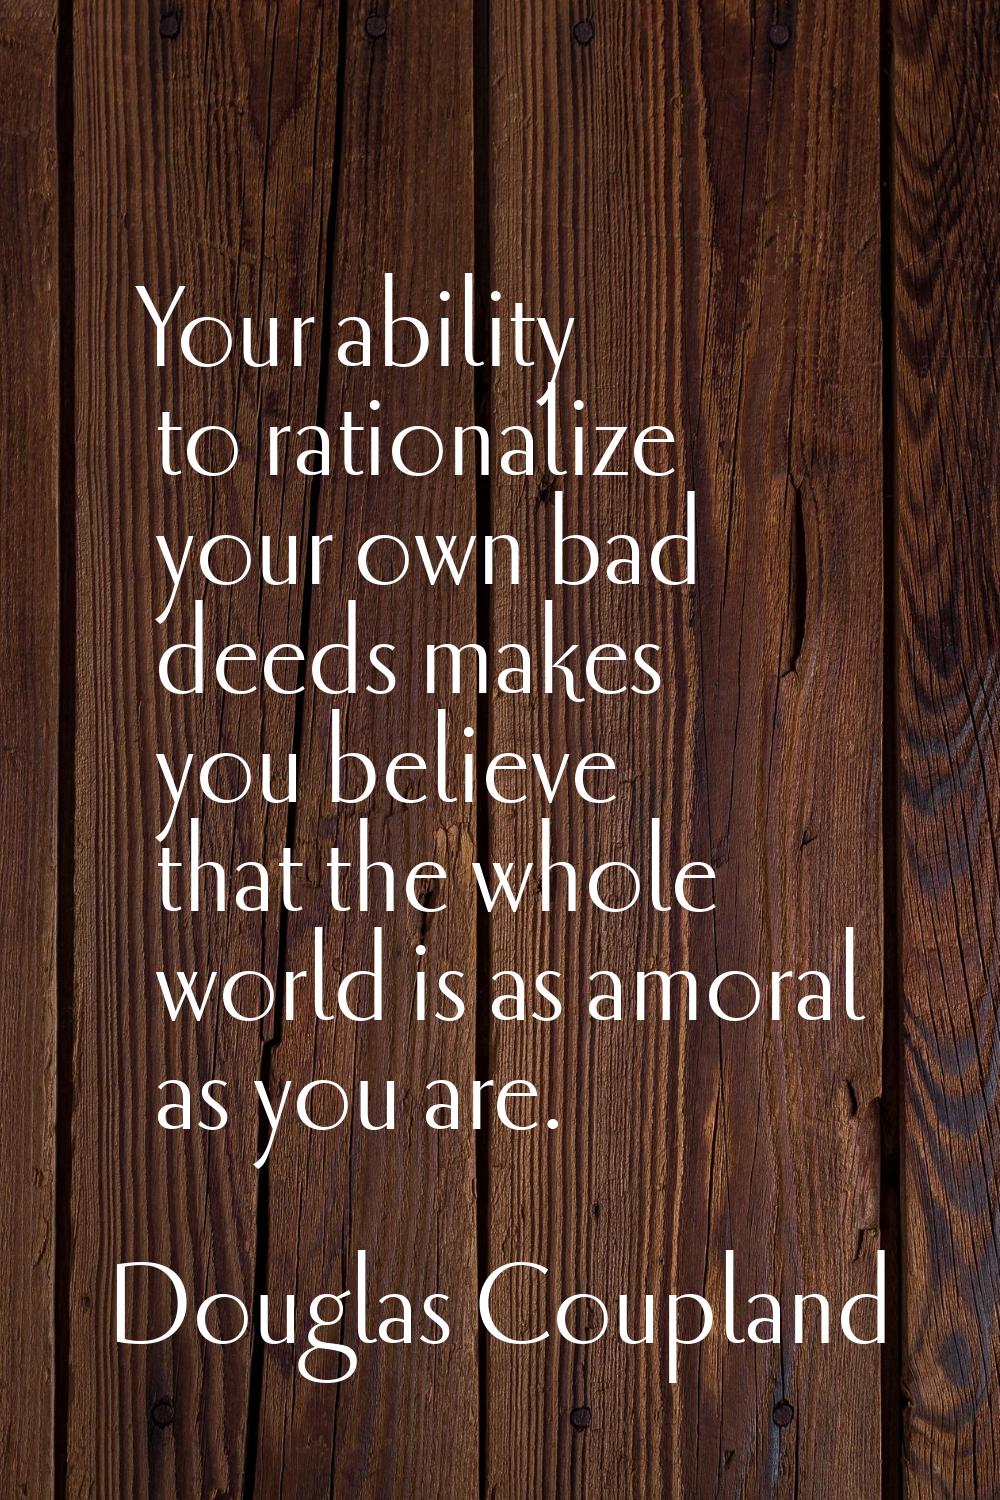 Your ability to rationalize your own bad deeds makes you believe that the whole world is as amoral 